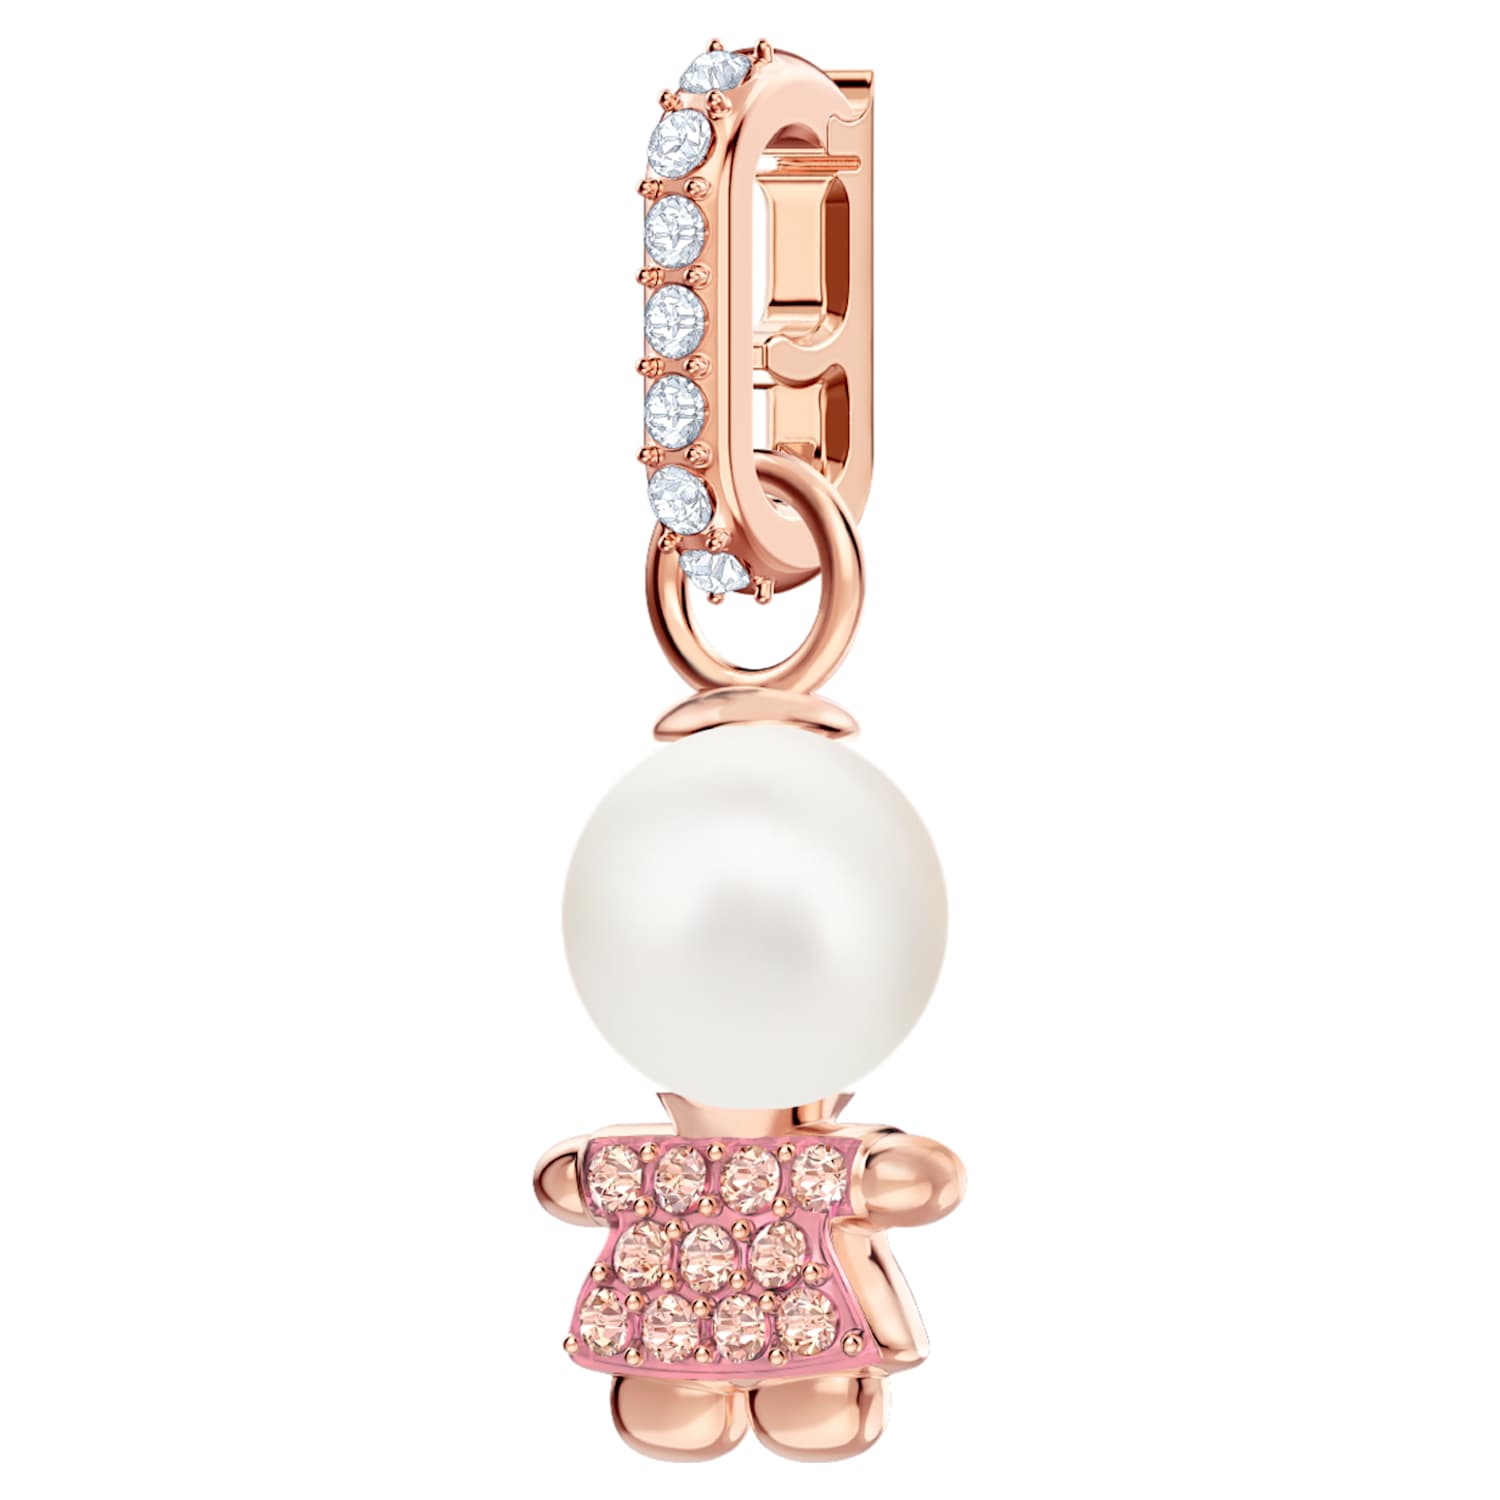 Swarovski Remix Collection Girl Charm, Pink, Rose-gold tone plated